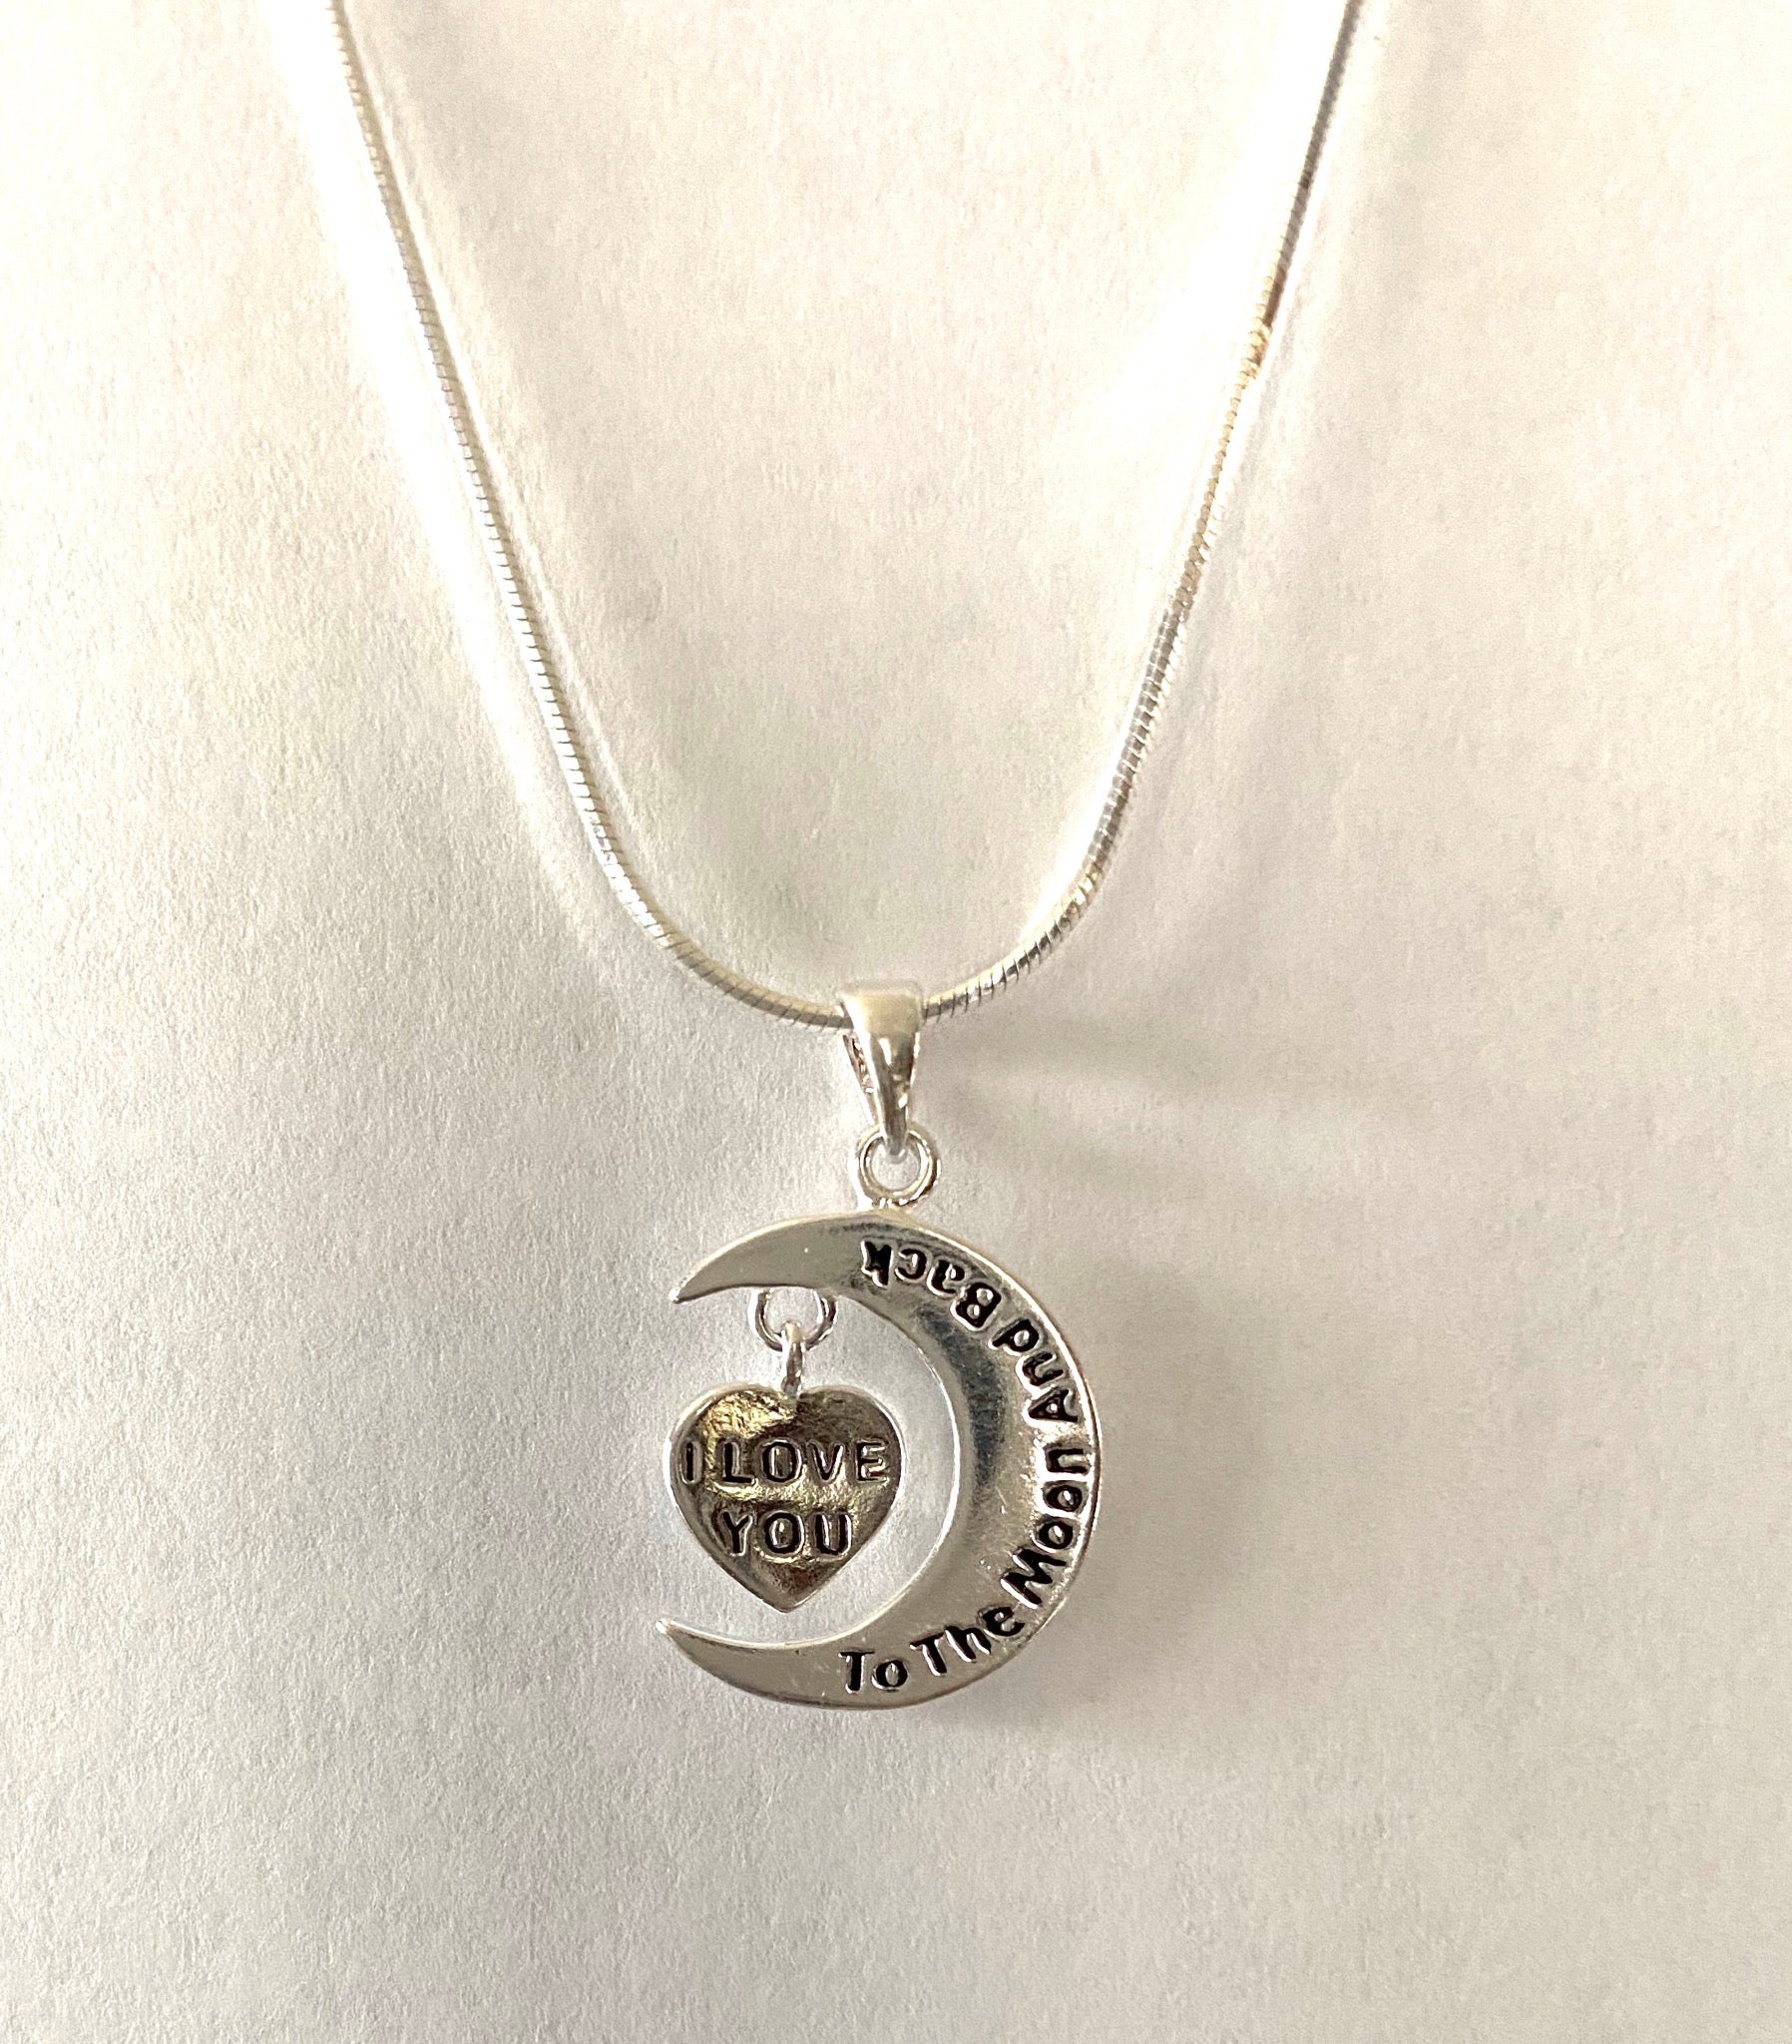 N059024 - Sterling Silver "Love you to the moon and back" Necklace